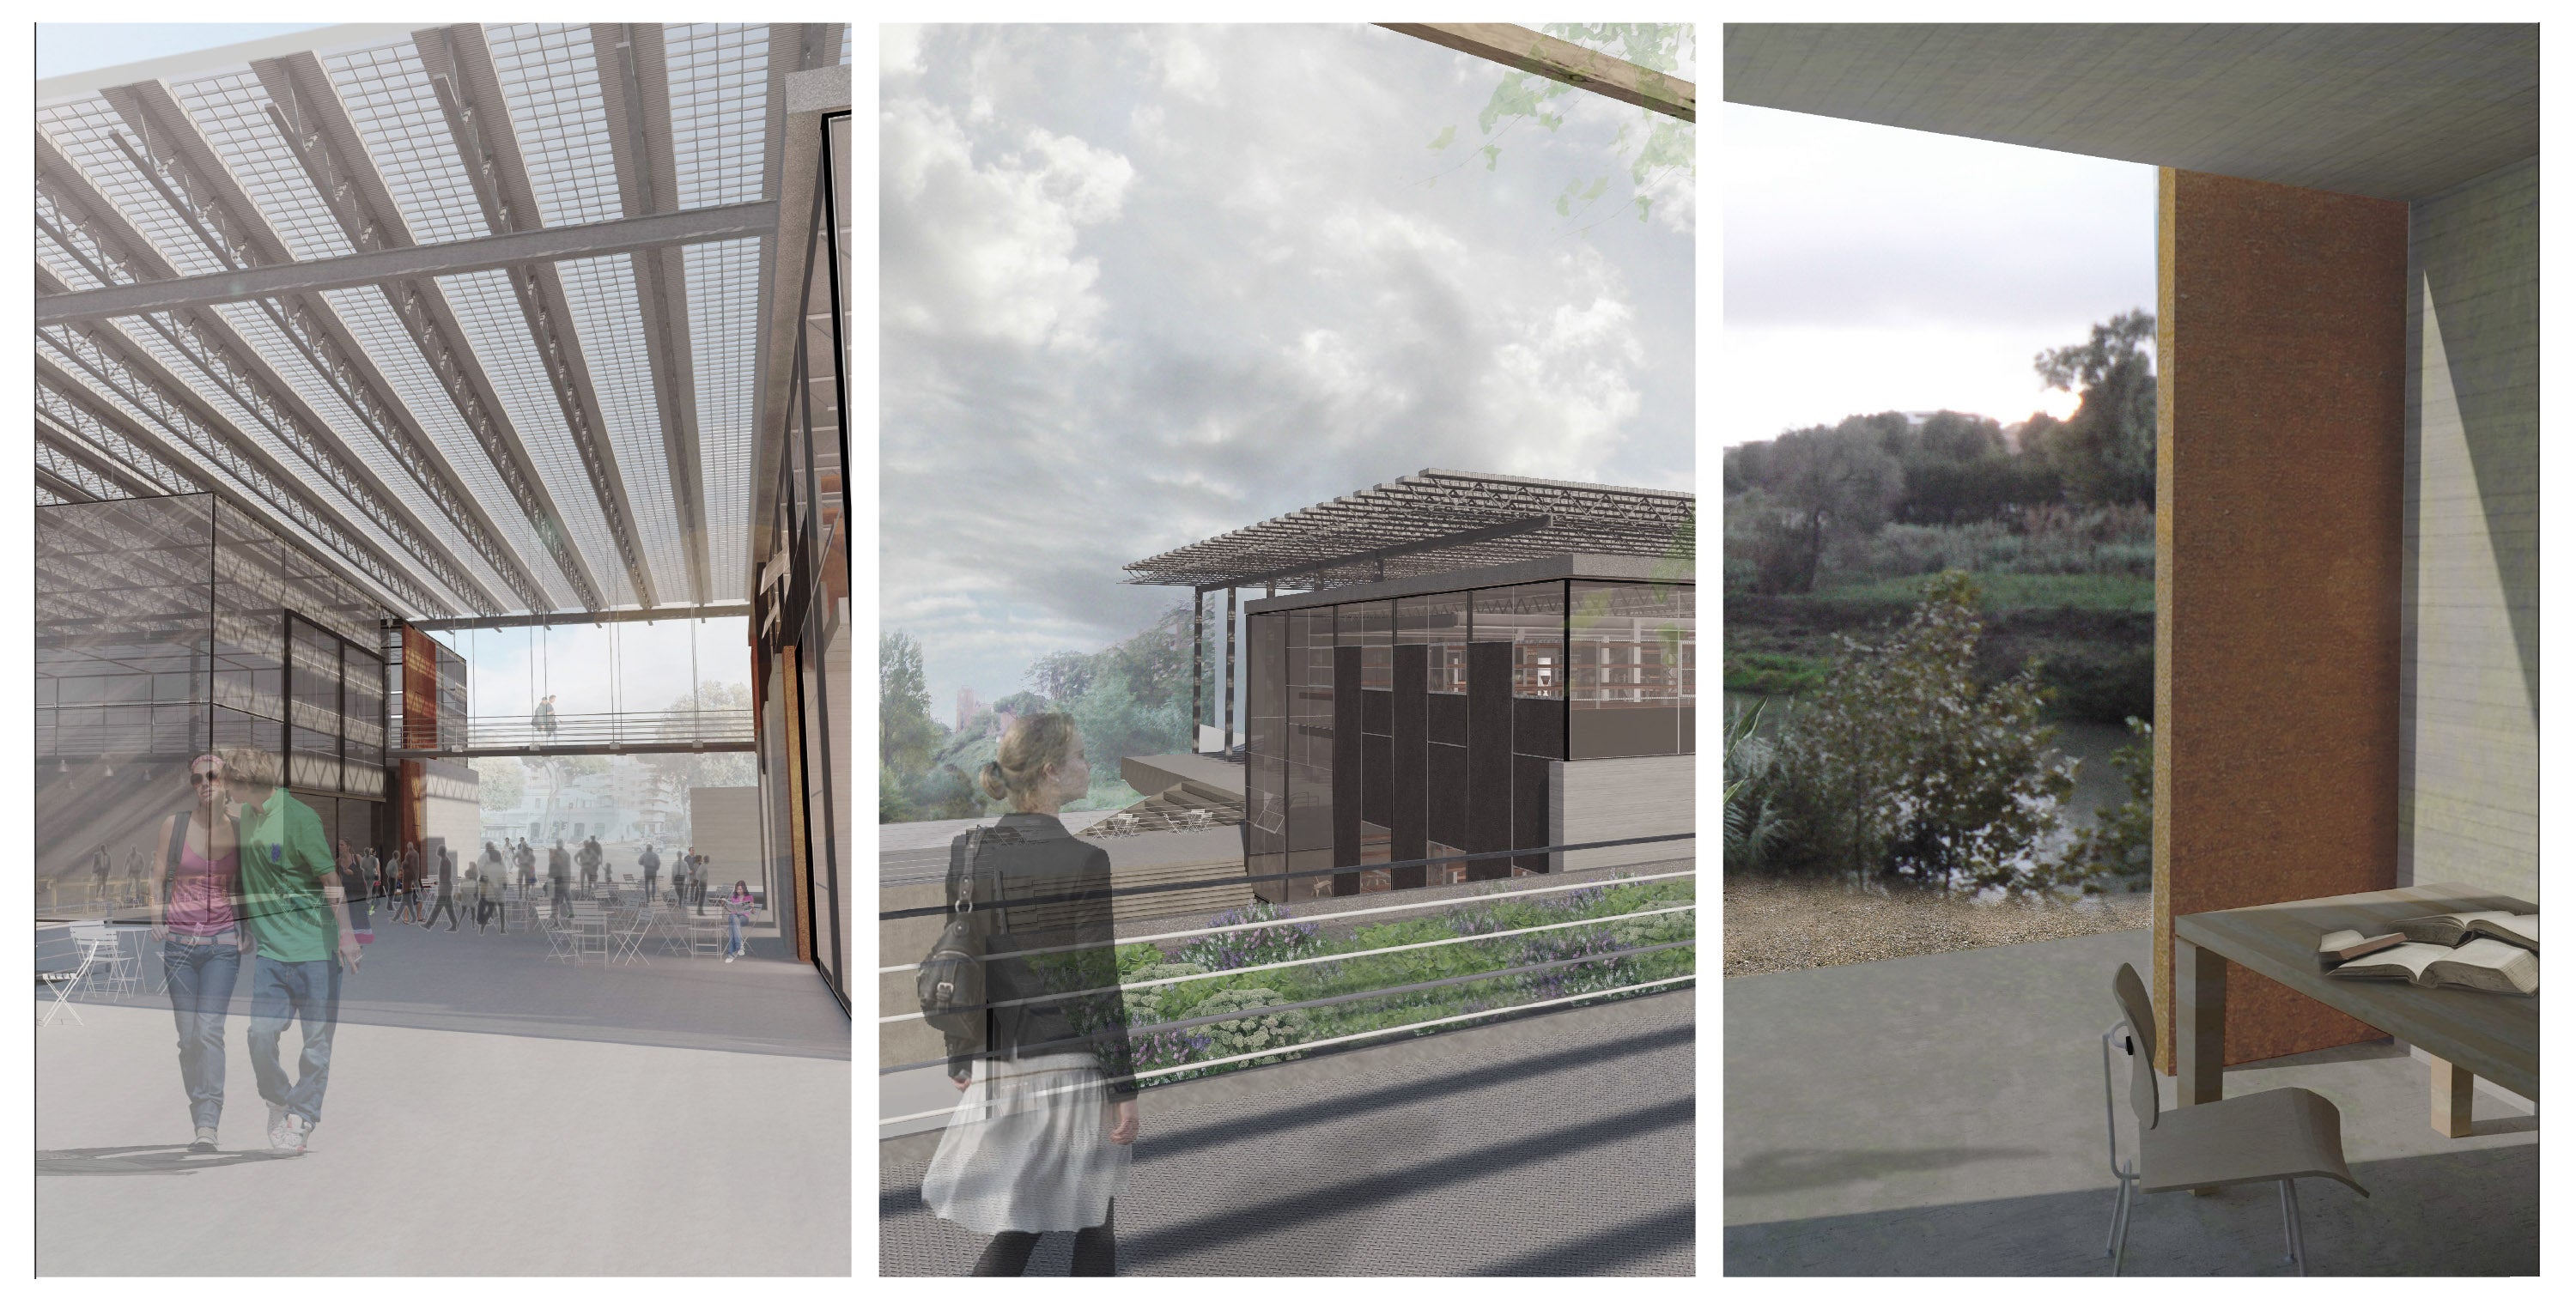 Several rendered views of the building, from the public atrium to window views in a private bedroom.